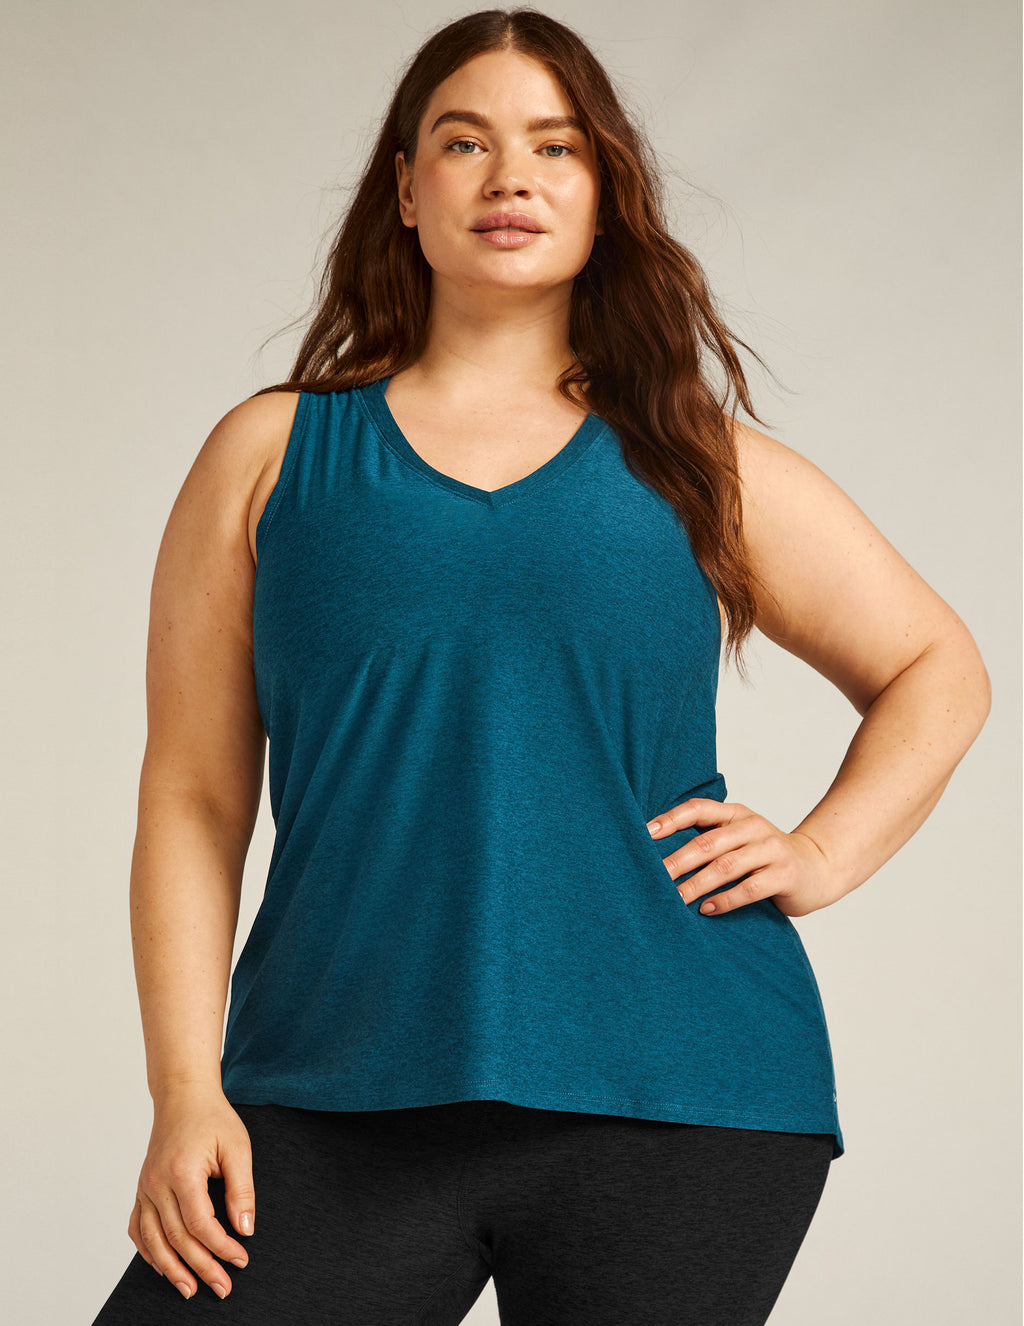 Sale - Athletic Wear Extended Sizes (1X-4X)